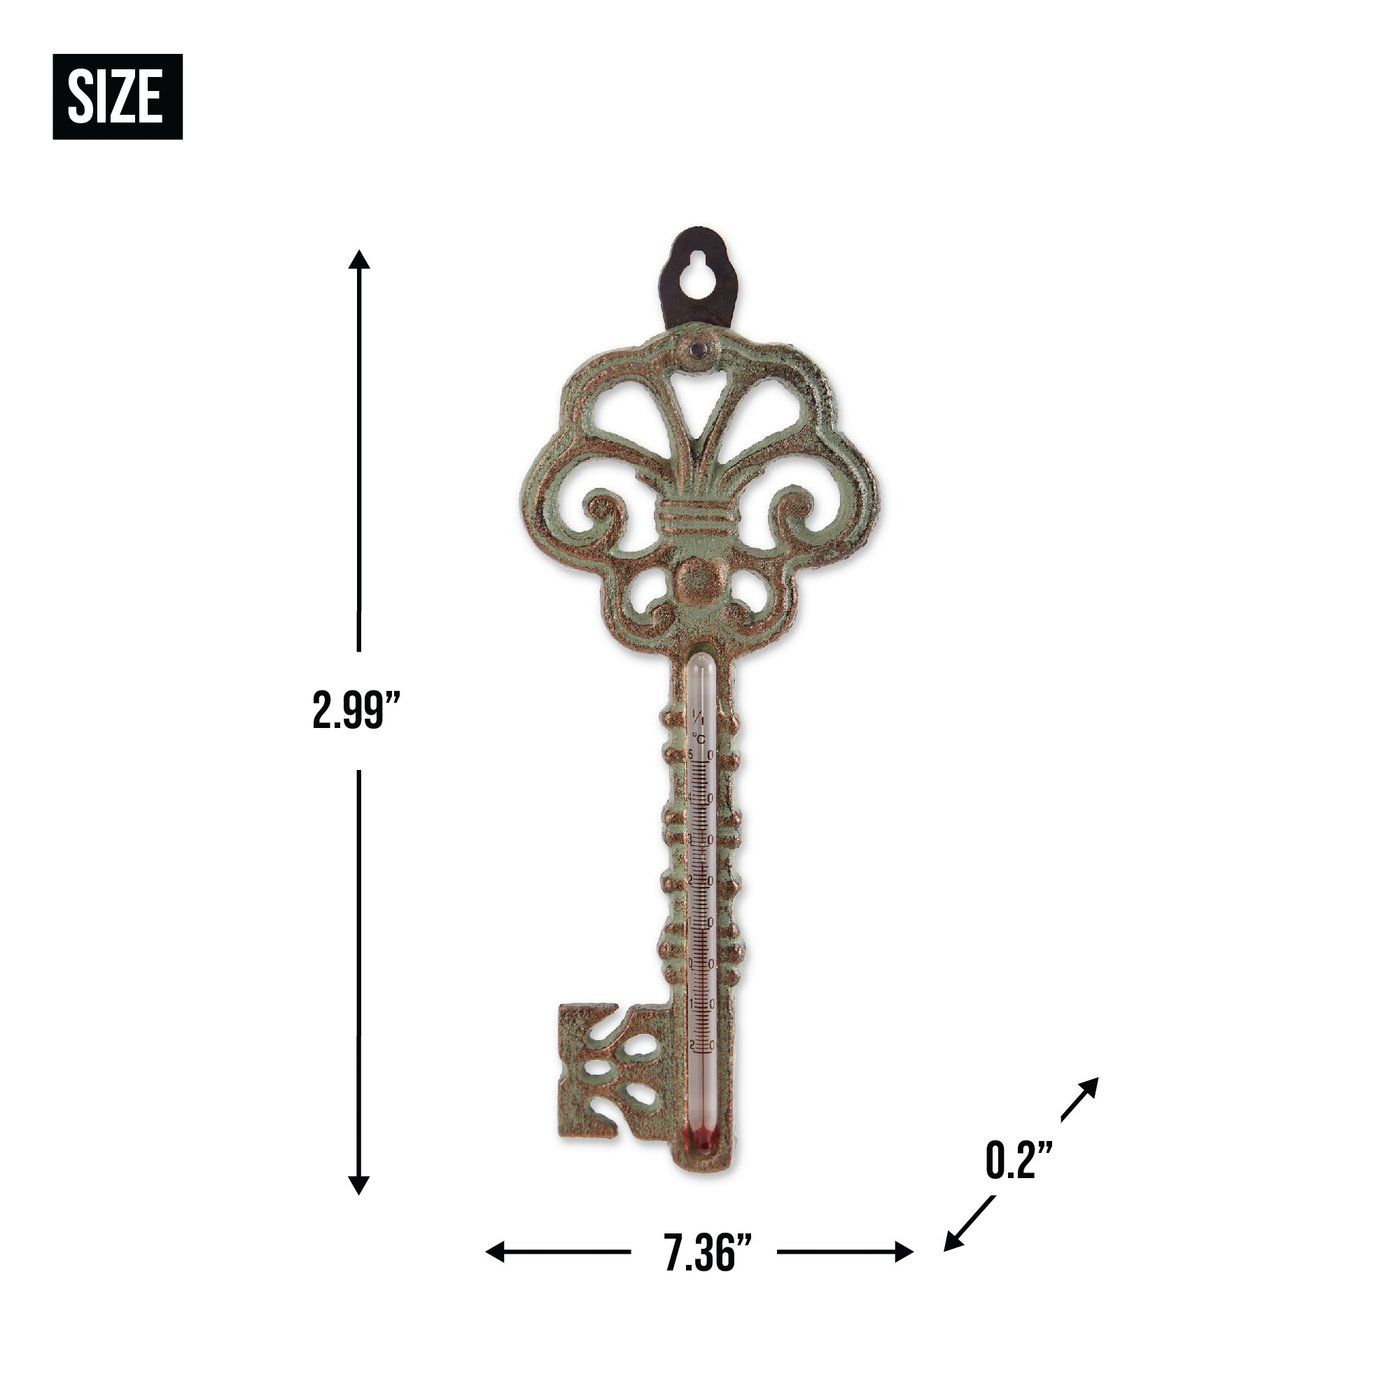 This easy to hang iron décor is beautiful and functional. Keep track of temps while enjoying the ornate beauty of the design. Hang this durable cast iron thermometer on your porch, deck, fence, garden shed, garage or even a tree to add a bit of functional décor to your garden or yard space.